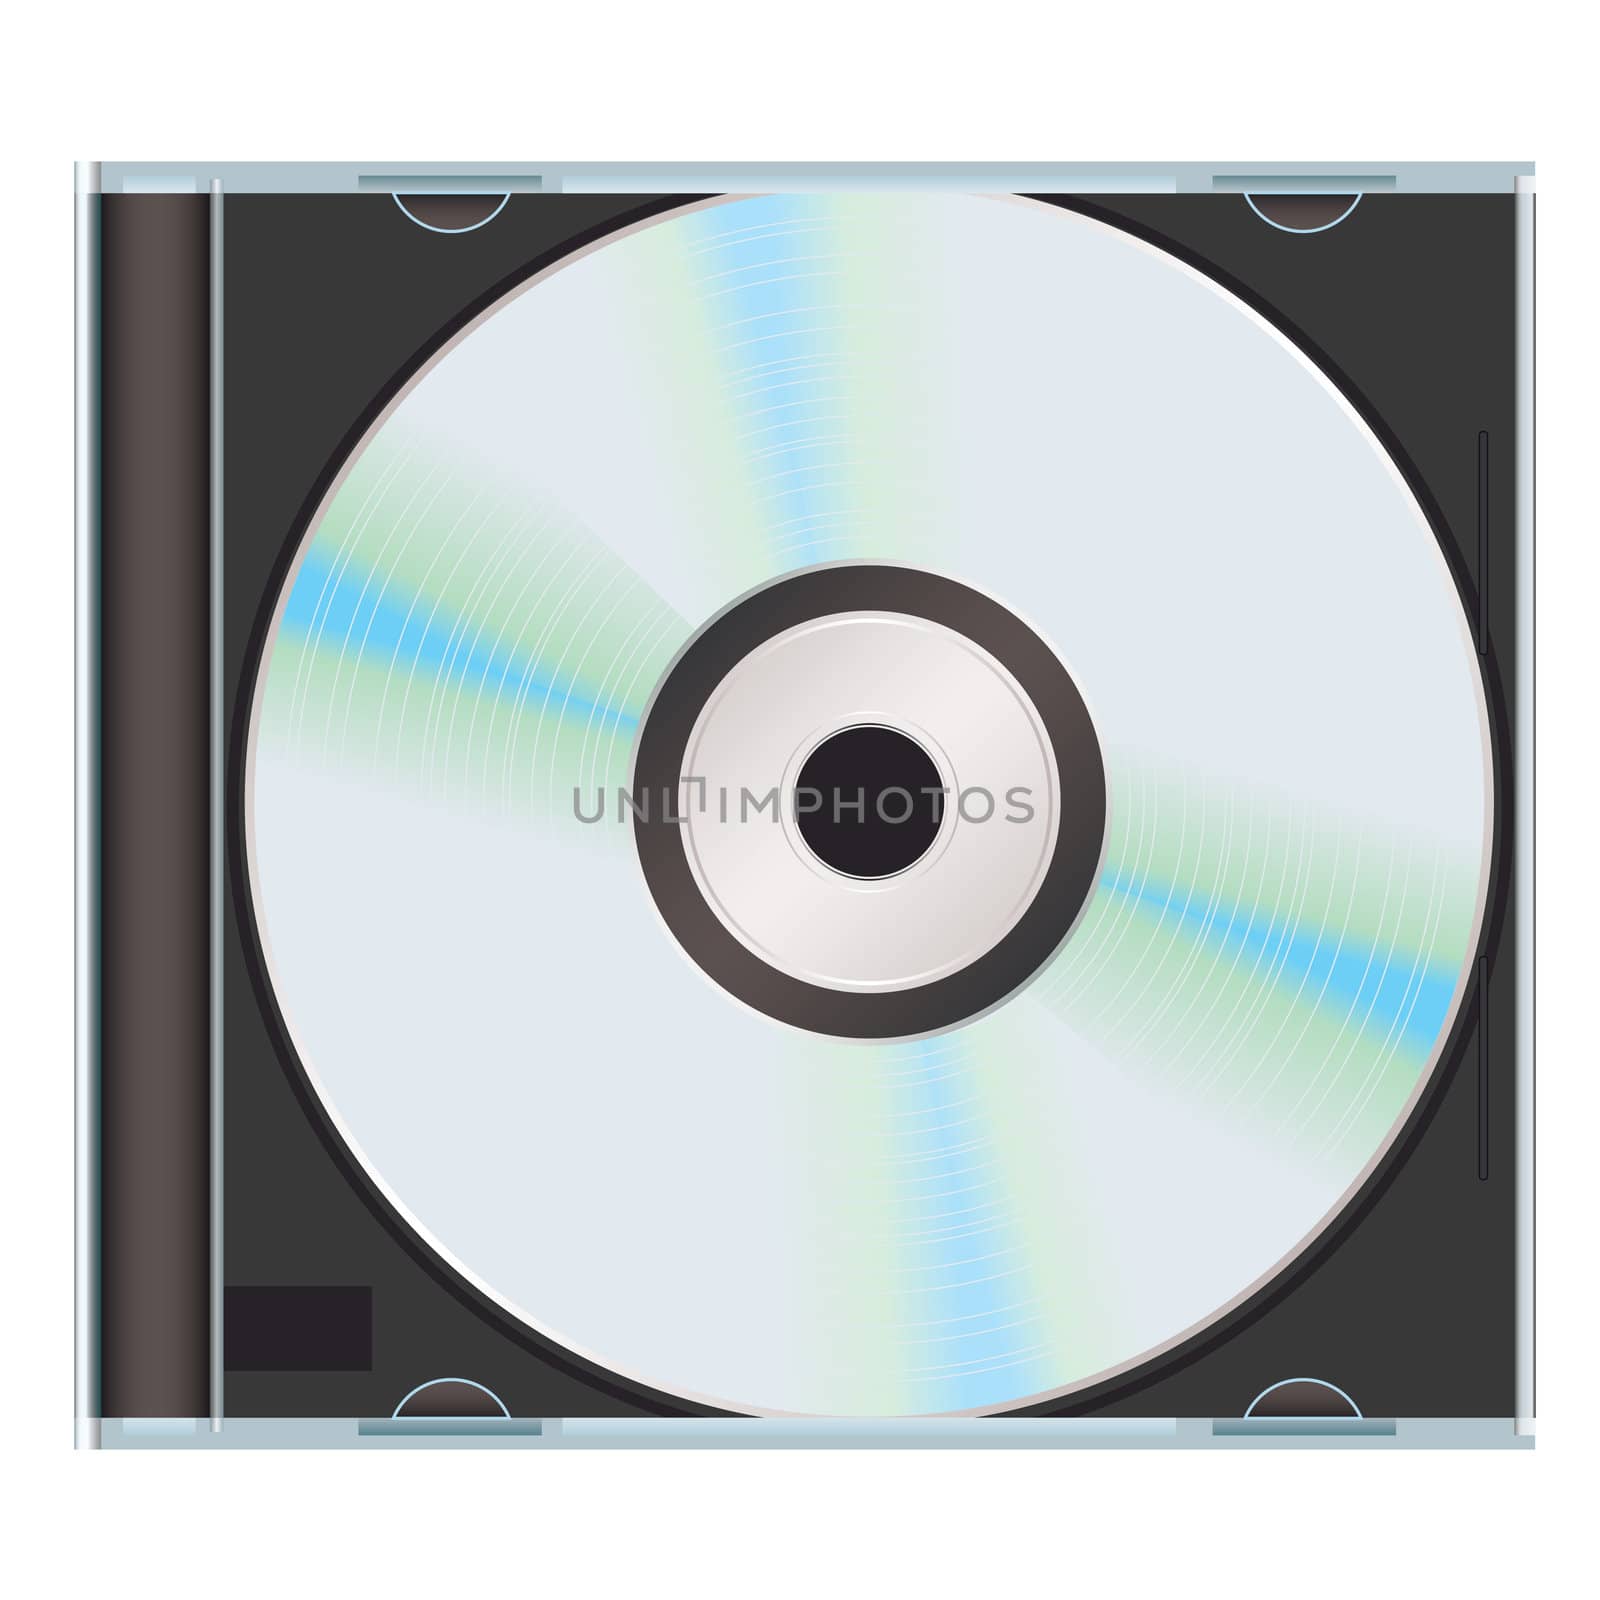 Computer or music cd with black cd case and blank label